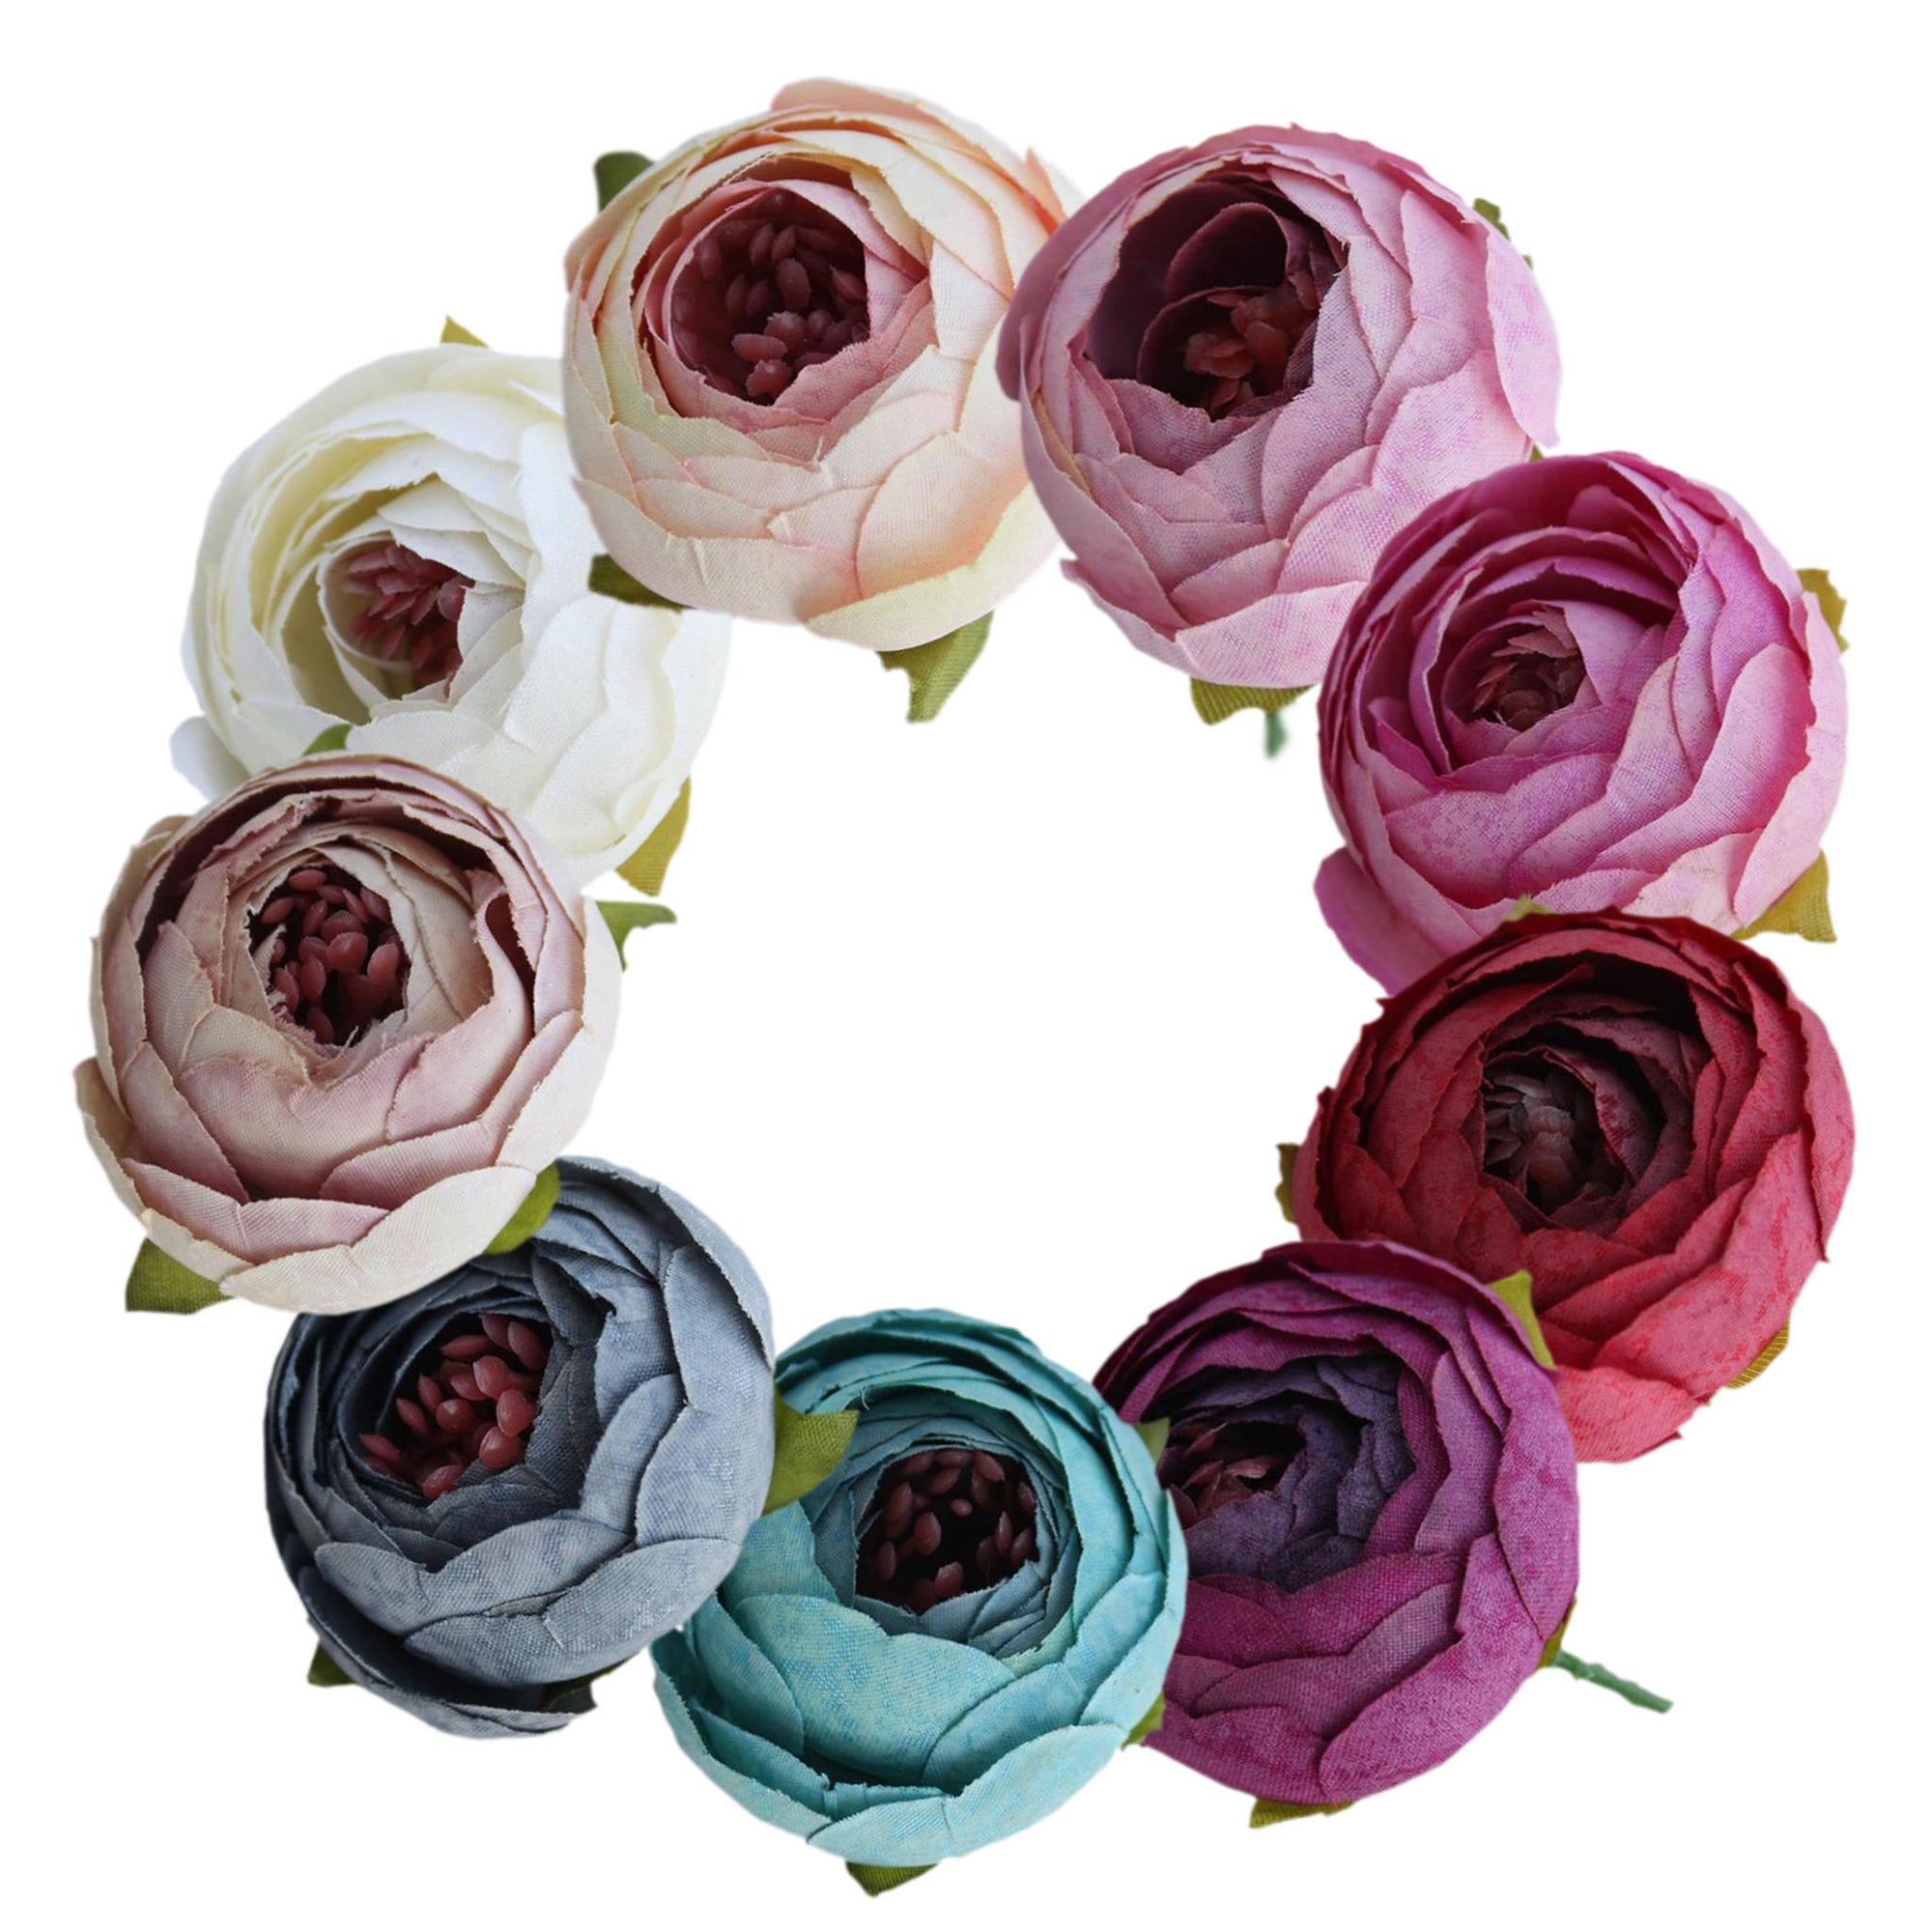 Small Peony Flower Heads Artificial Silk Roses 100 pcs for Wedding Decor Favors